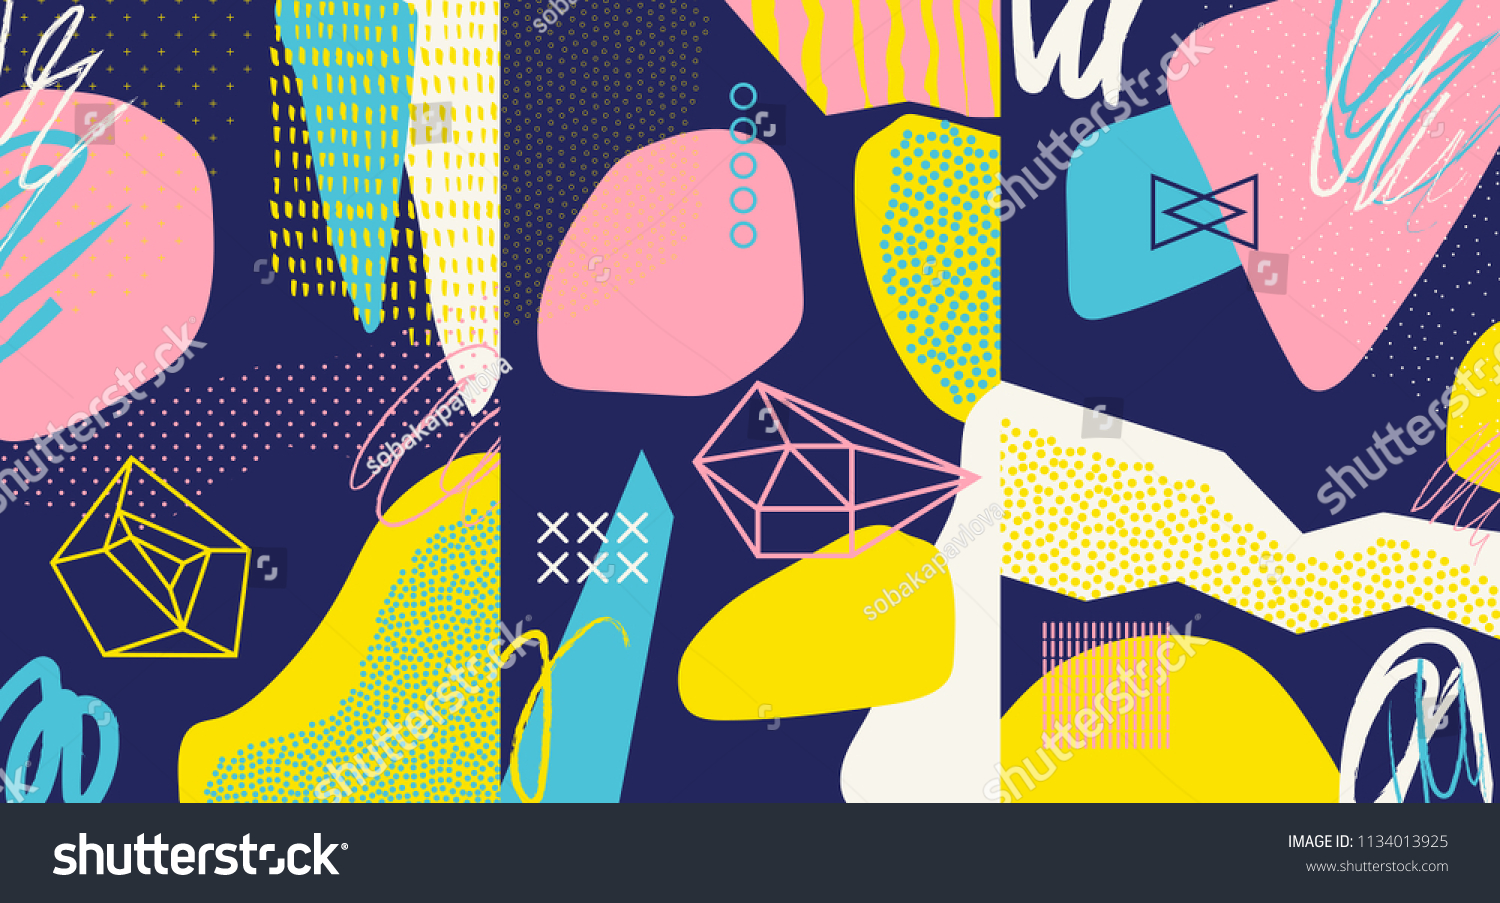 Creative doodle art header with different shapes and textures. Collage. Vector #1134013925